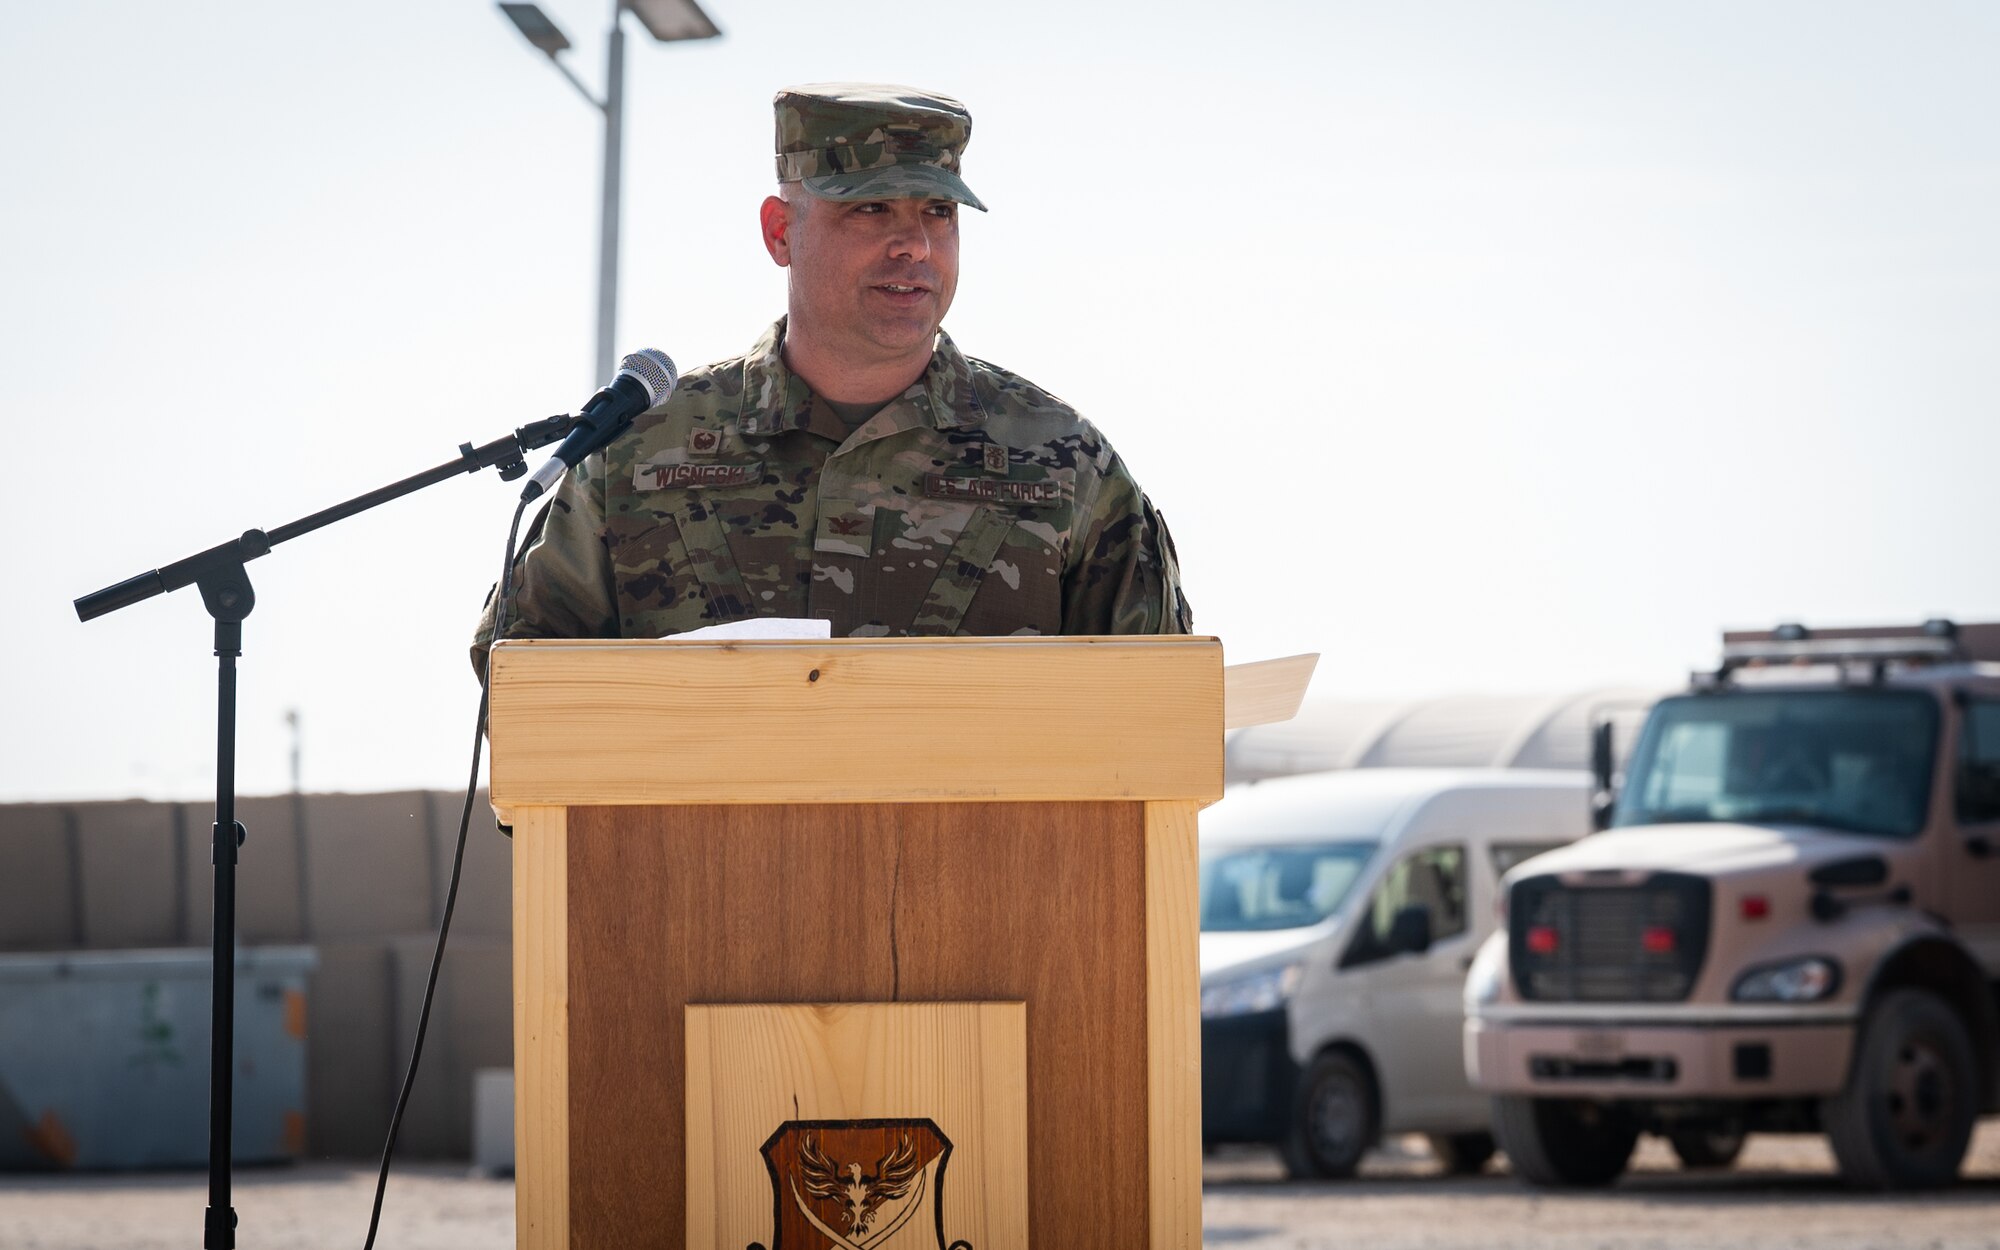 Col. Jeffrey Wisneski, incoming 378th Expeditionary Medical Group commander, makes remarks during the 378th EMDG change of command ceremony at Prince Sultan Air Base, Kingdom of Saudi Arabia, Nov. 9, 2021. A change of command is a military tradition that represents a formal transfer of authority and responsibility for a unit from one commanding officer to another. (U.S. Air Force photo by Senior Airman Jacob B. Wrightsman)